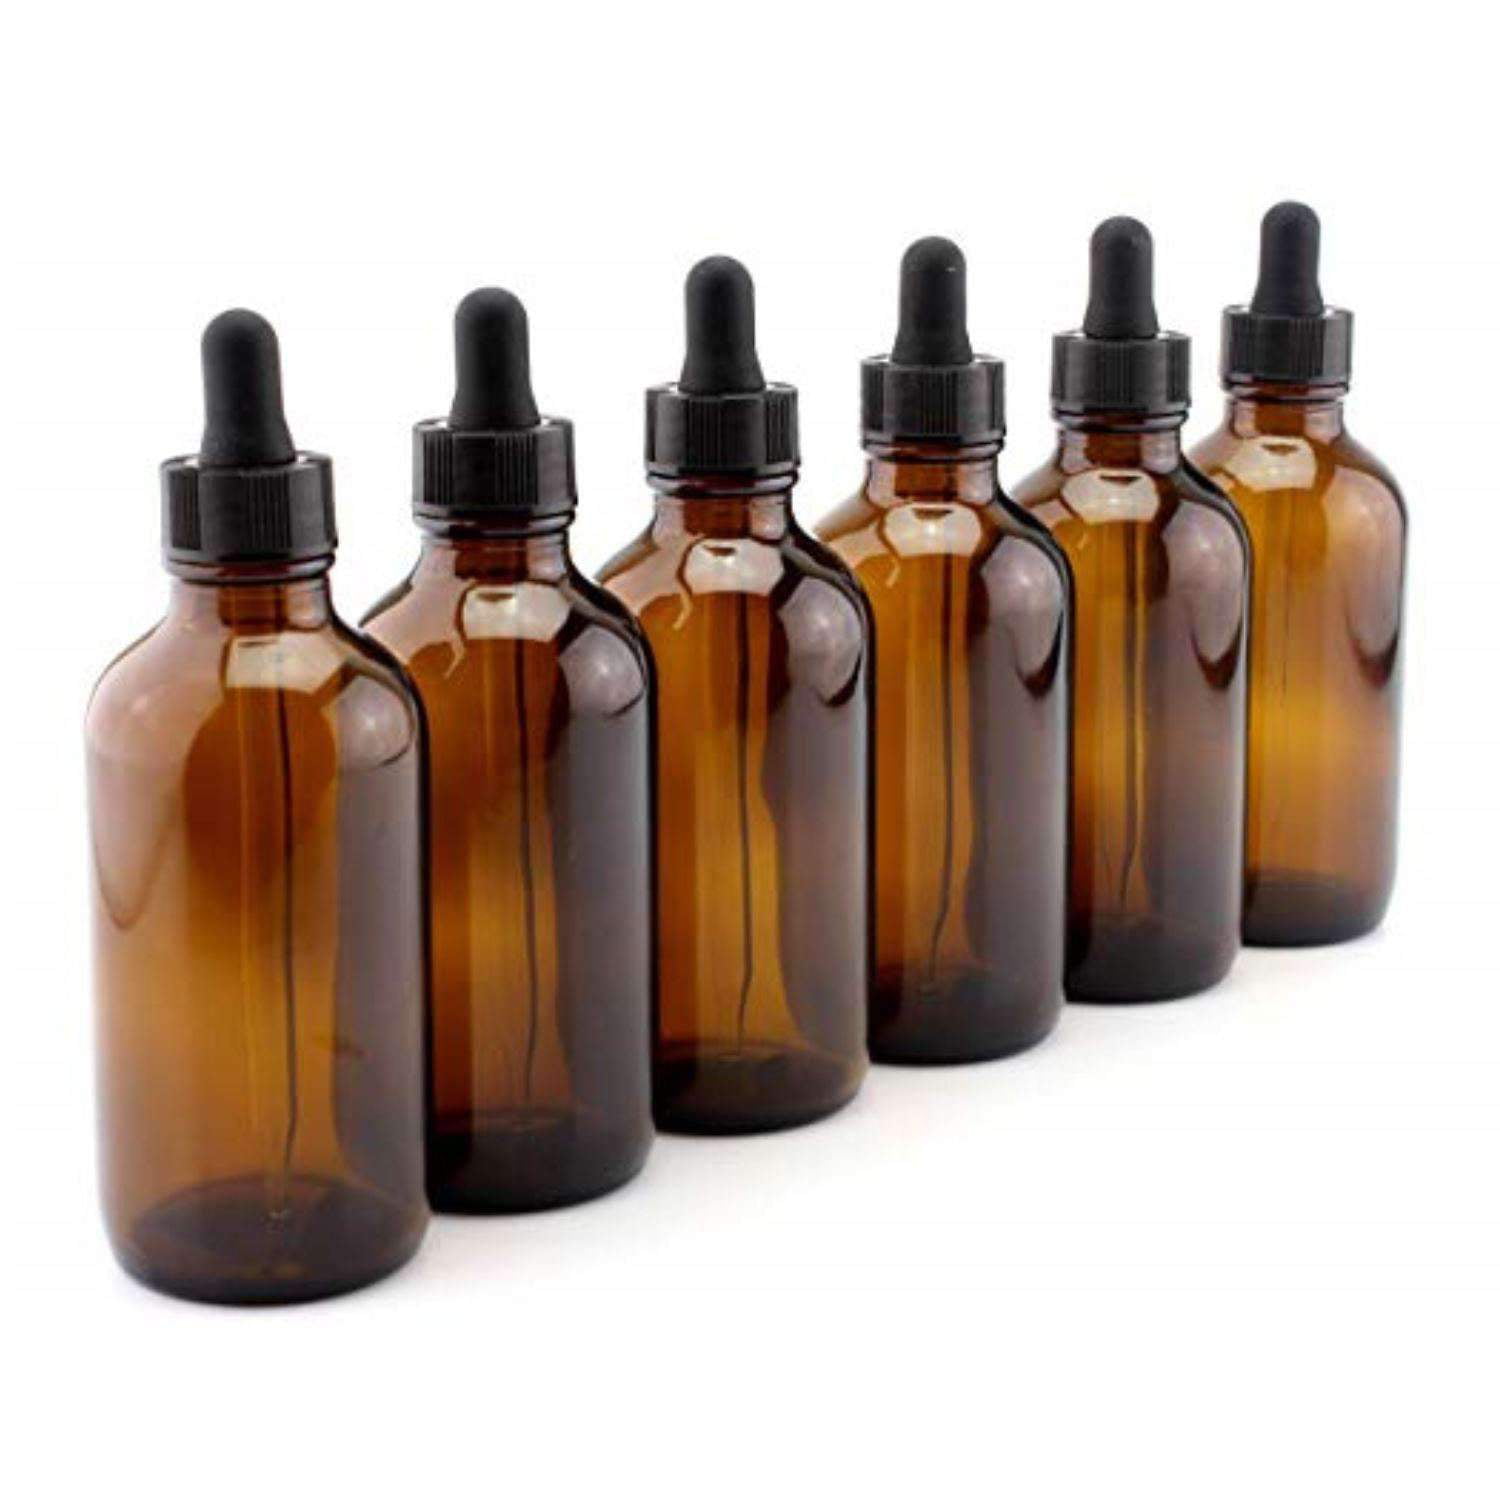 Green Glass 4oz Dropper Bottles 6 Pack Great Dropper Bottles for Essential Oils and Aromatherapy 